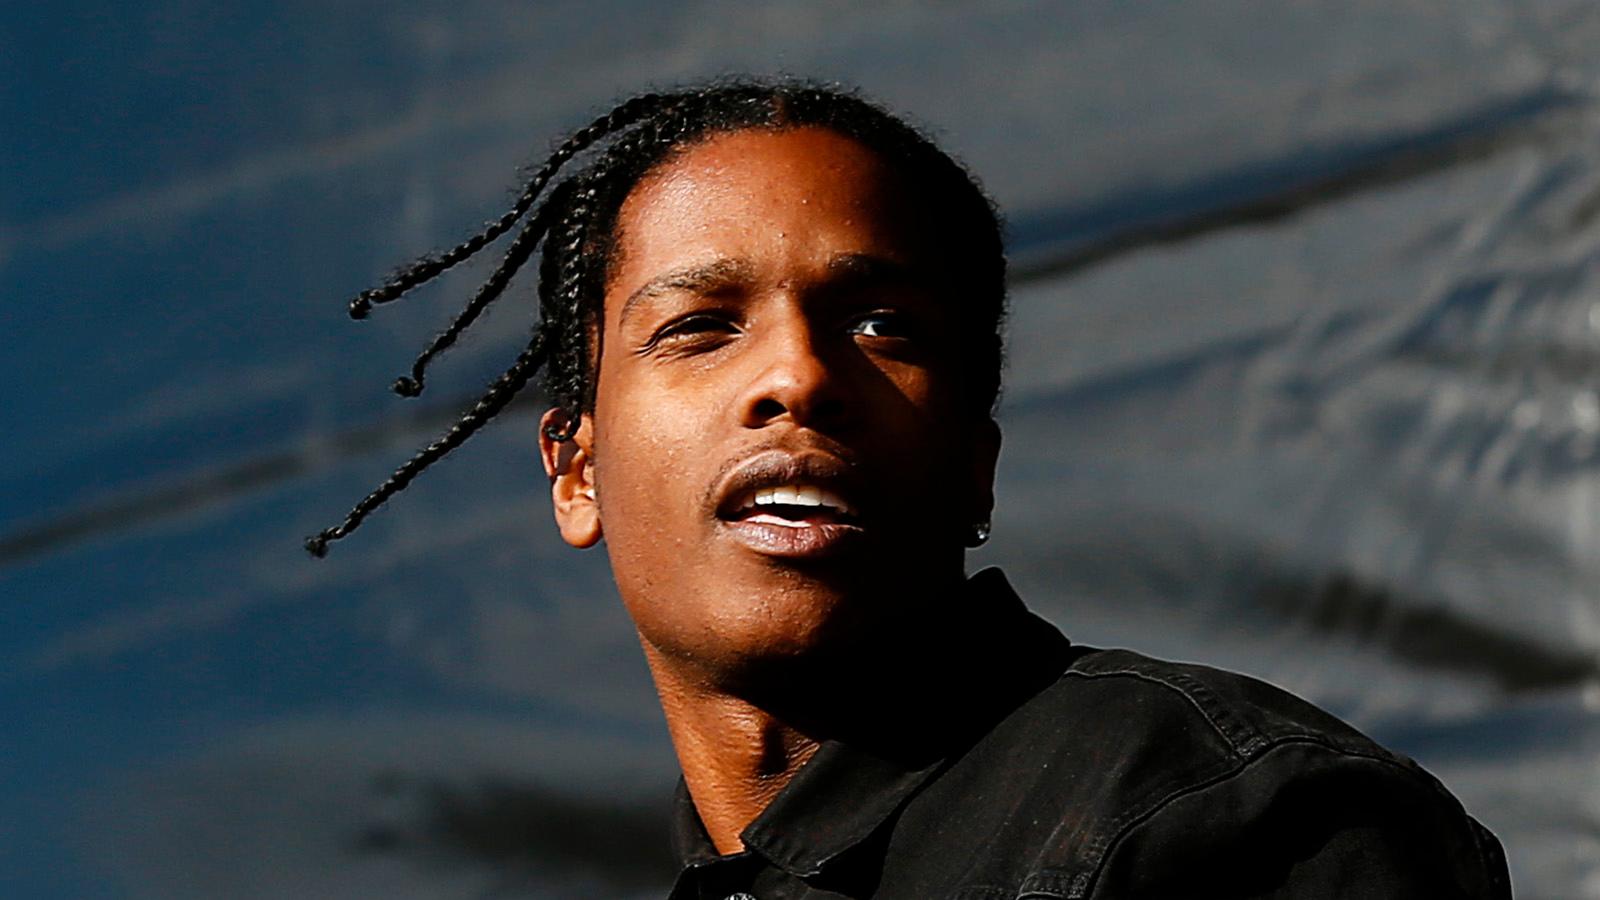 Police sources confirm that Asap Rocky is one of the suspects in a gross assault case in Stockholm.